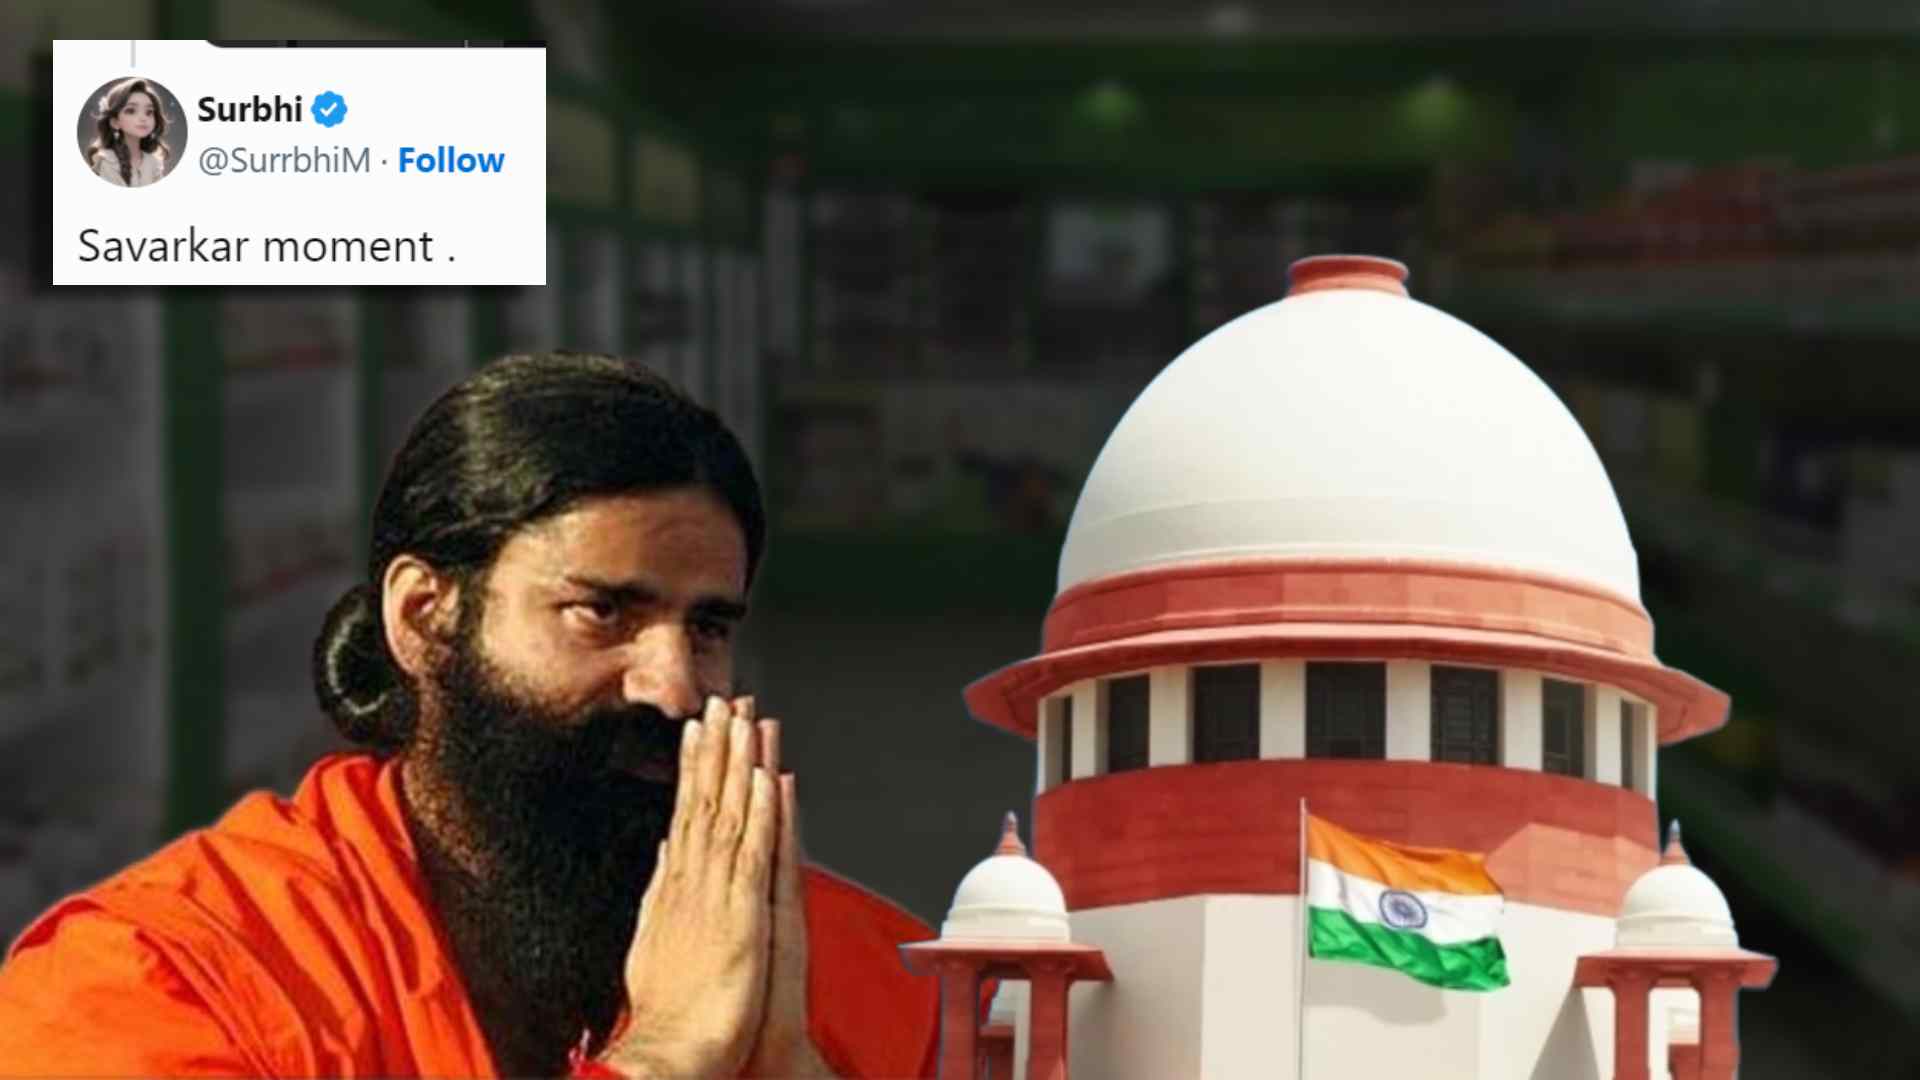 Baba Ramdev-Led Patanjali Tenders Unconditional Apology After SC Summon; Internet Says Savarkar Moment [Video]